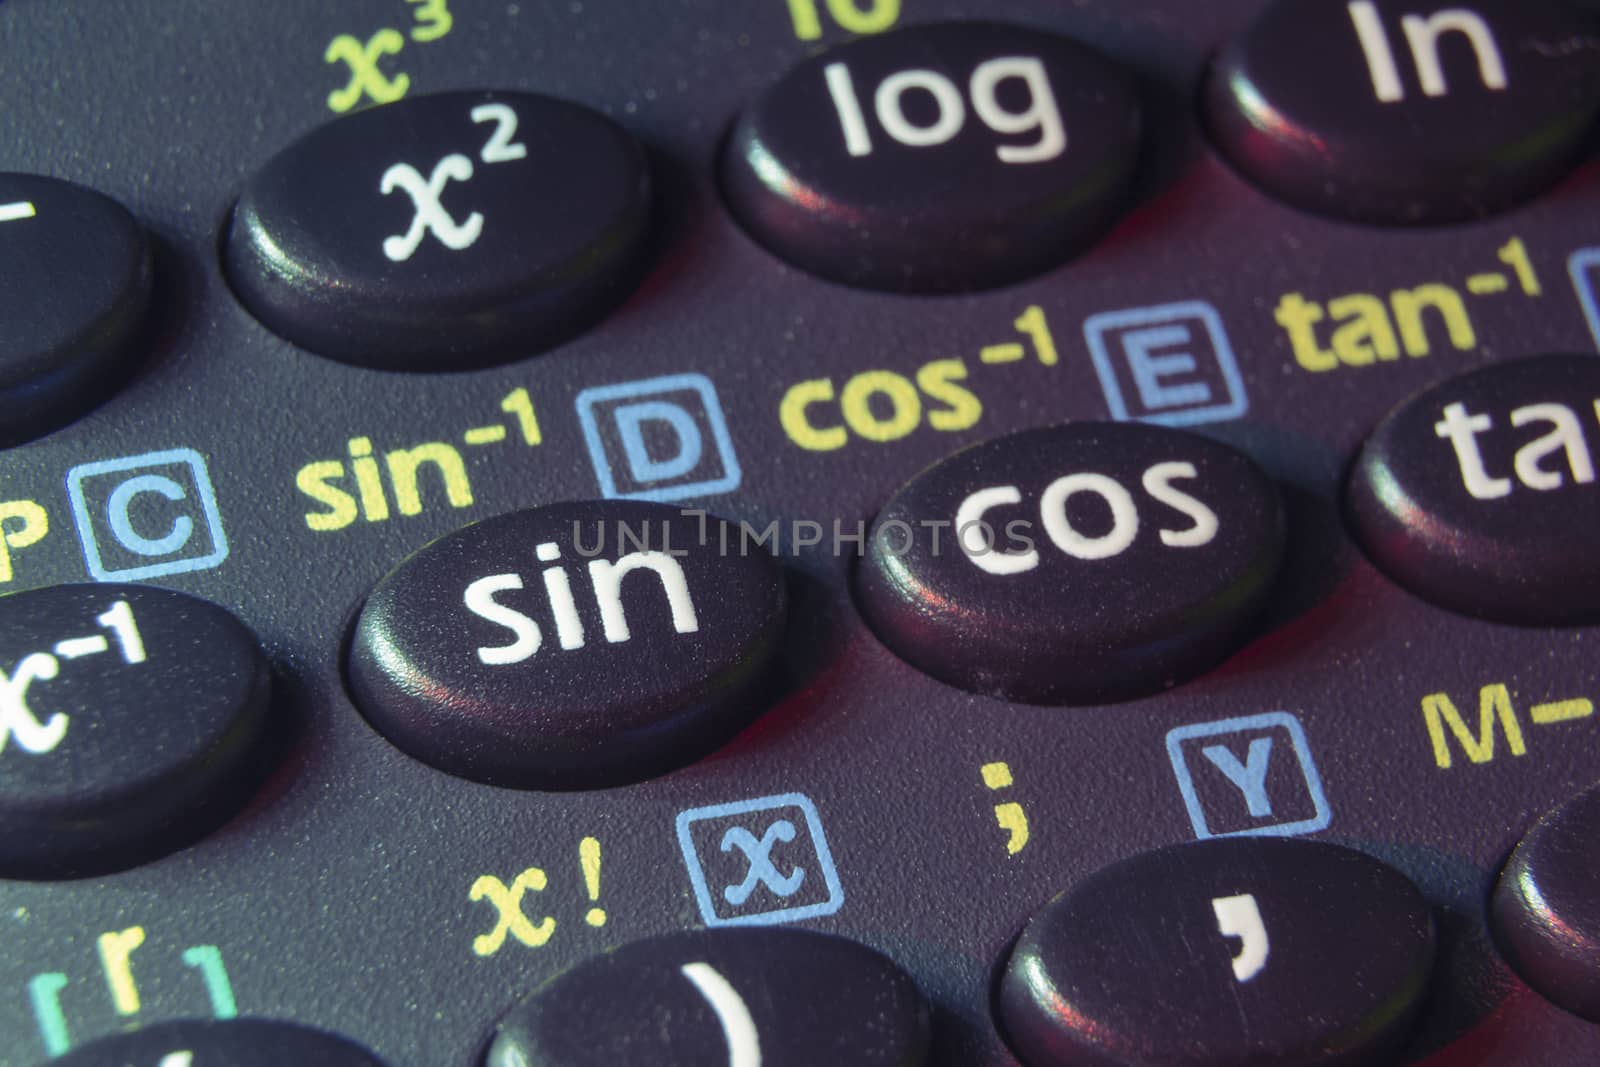 trigonometry functions push buttons of scientific calculator; focus on sin button